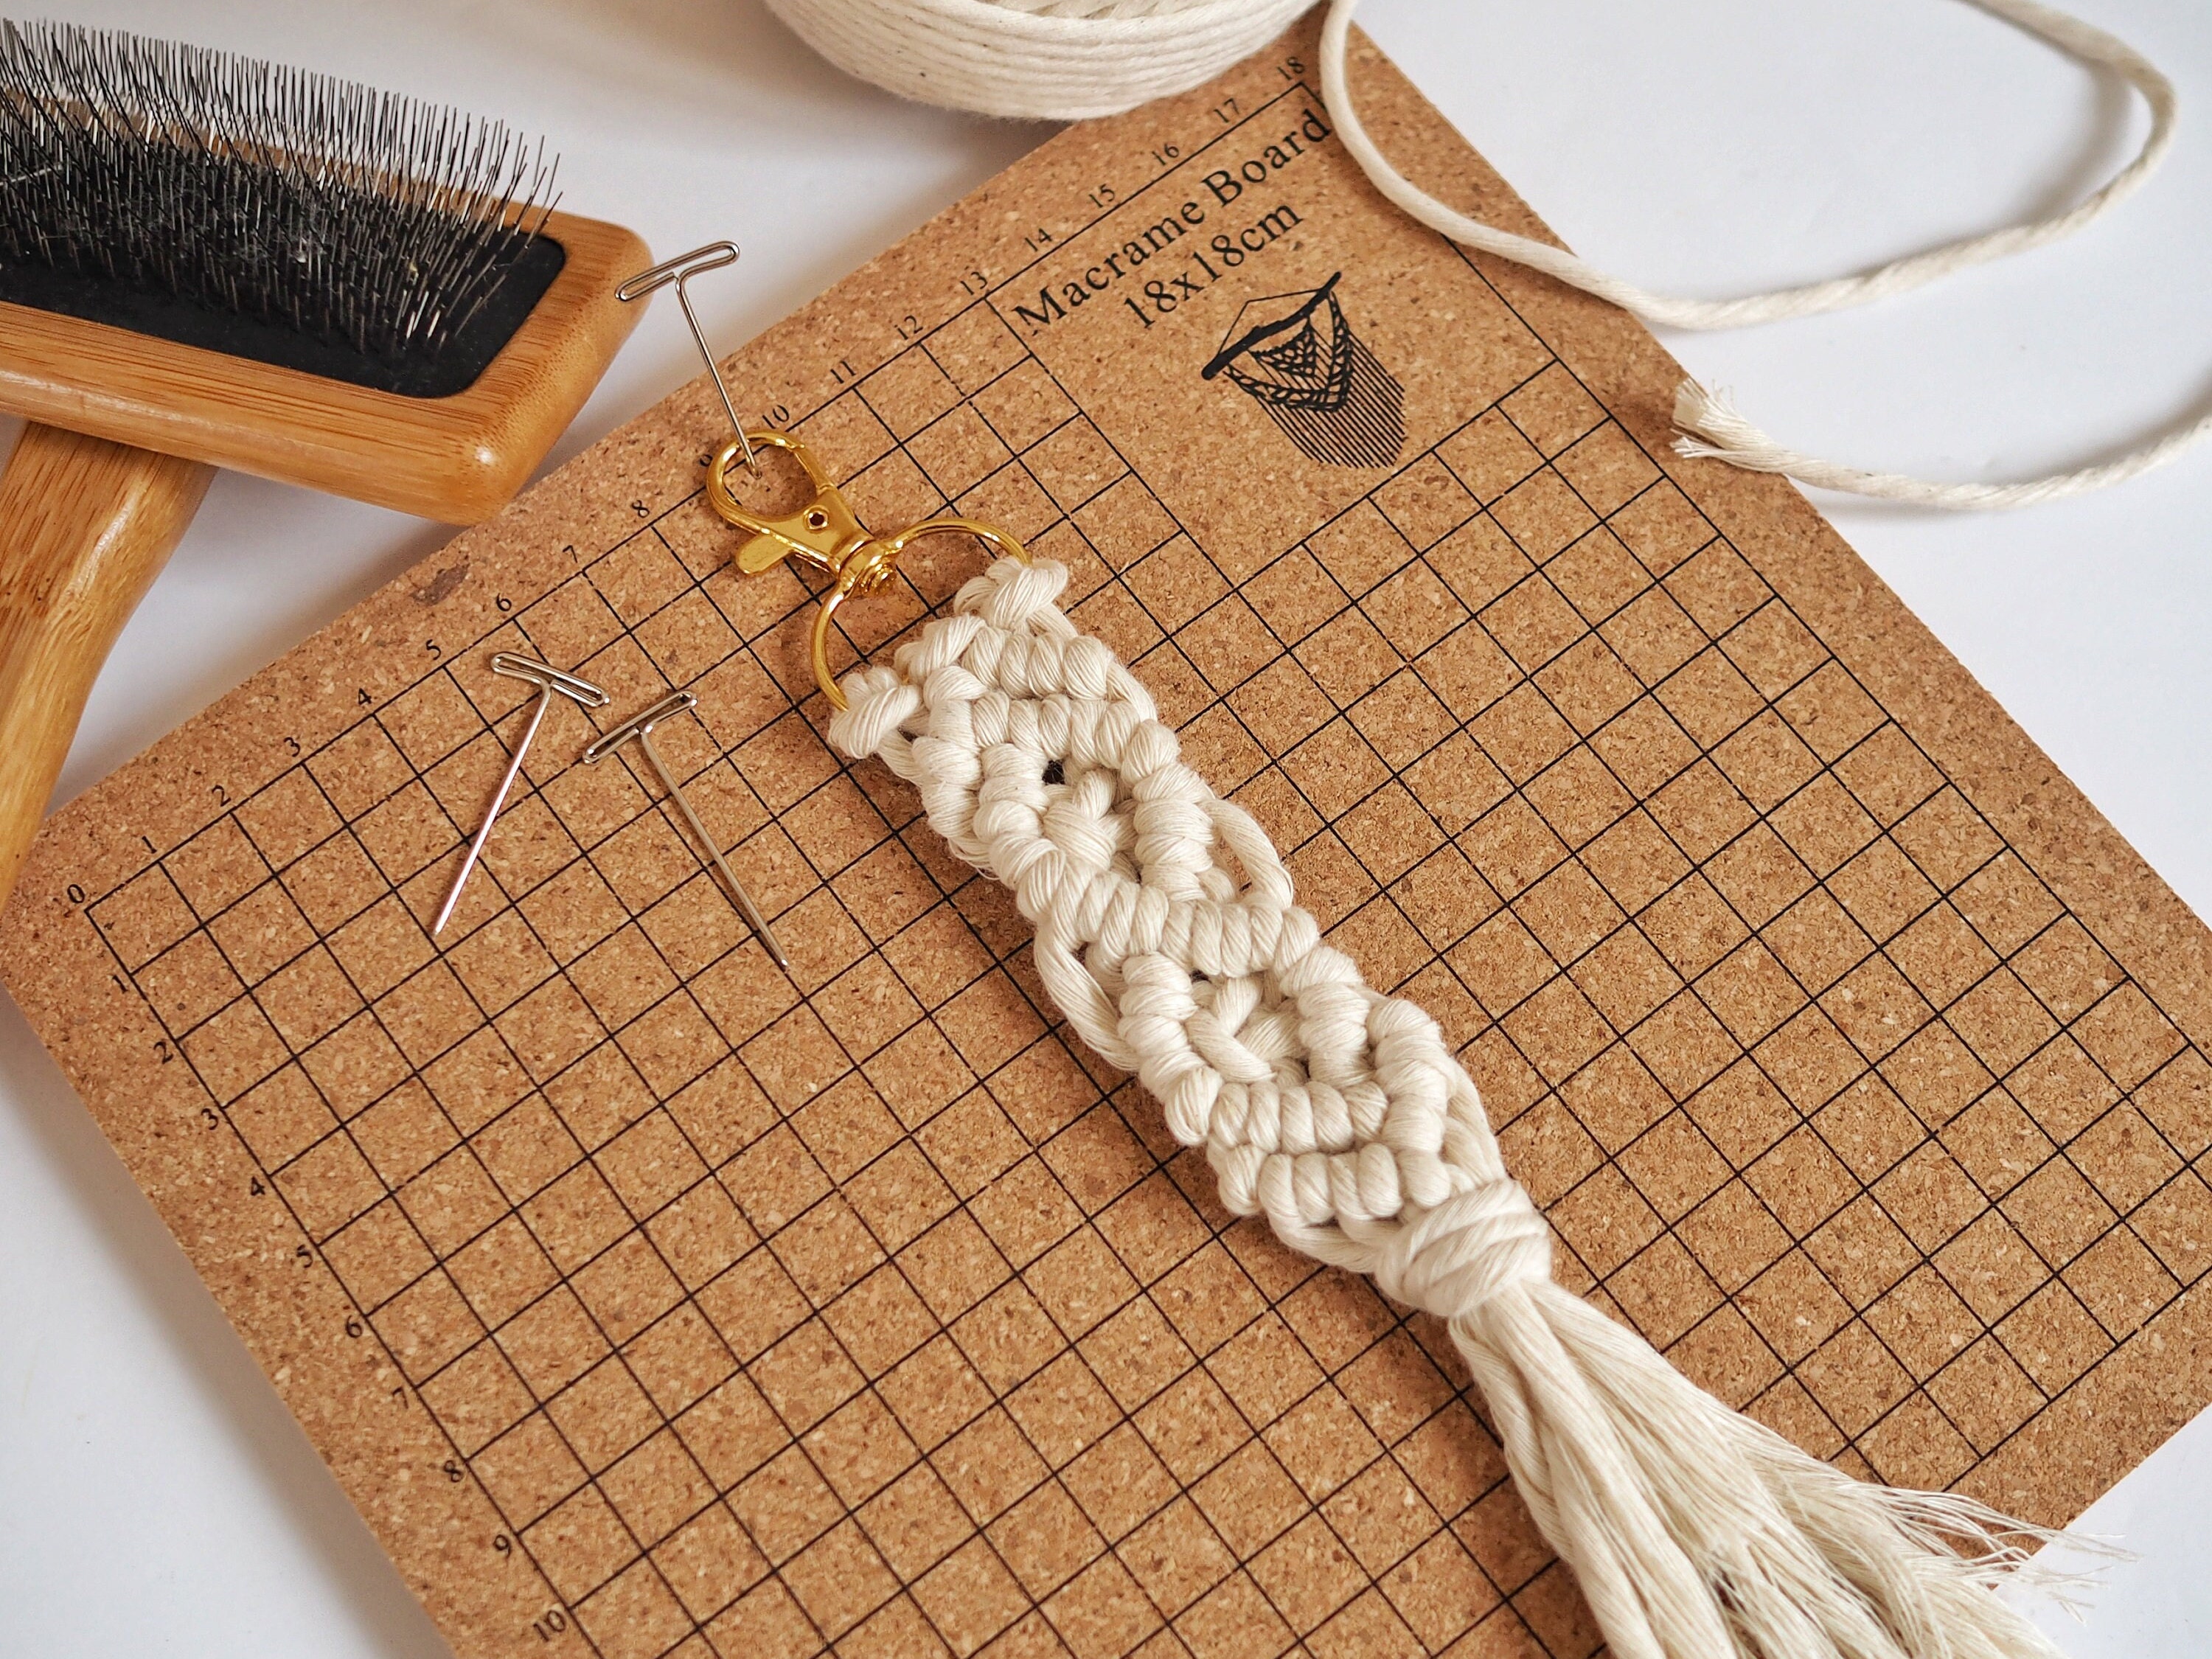 Macrame Cork Board Available in 3 Sizes Perfect for All Types of